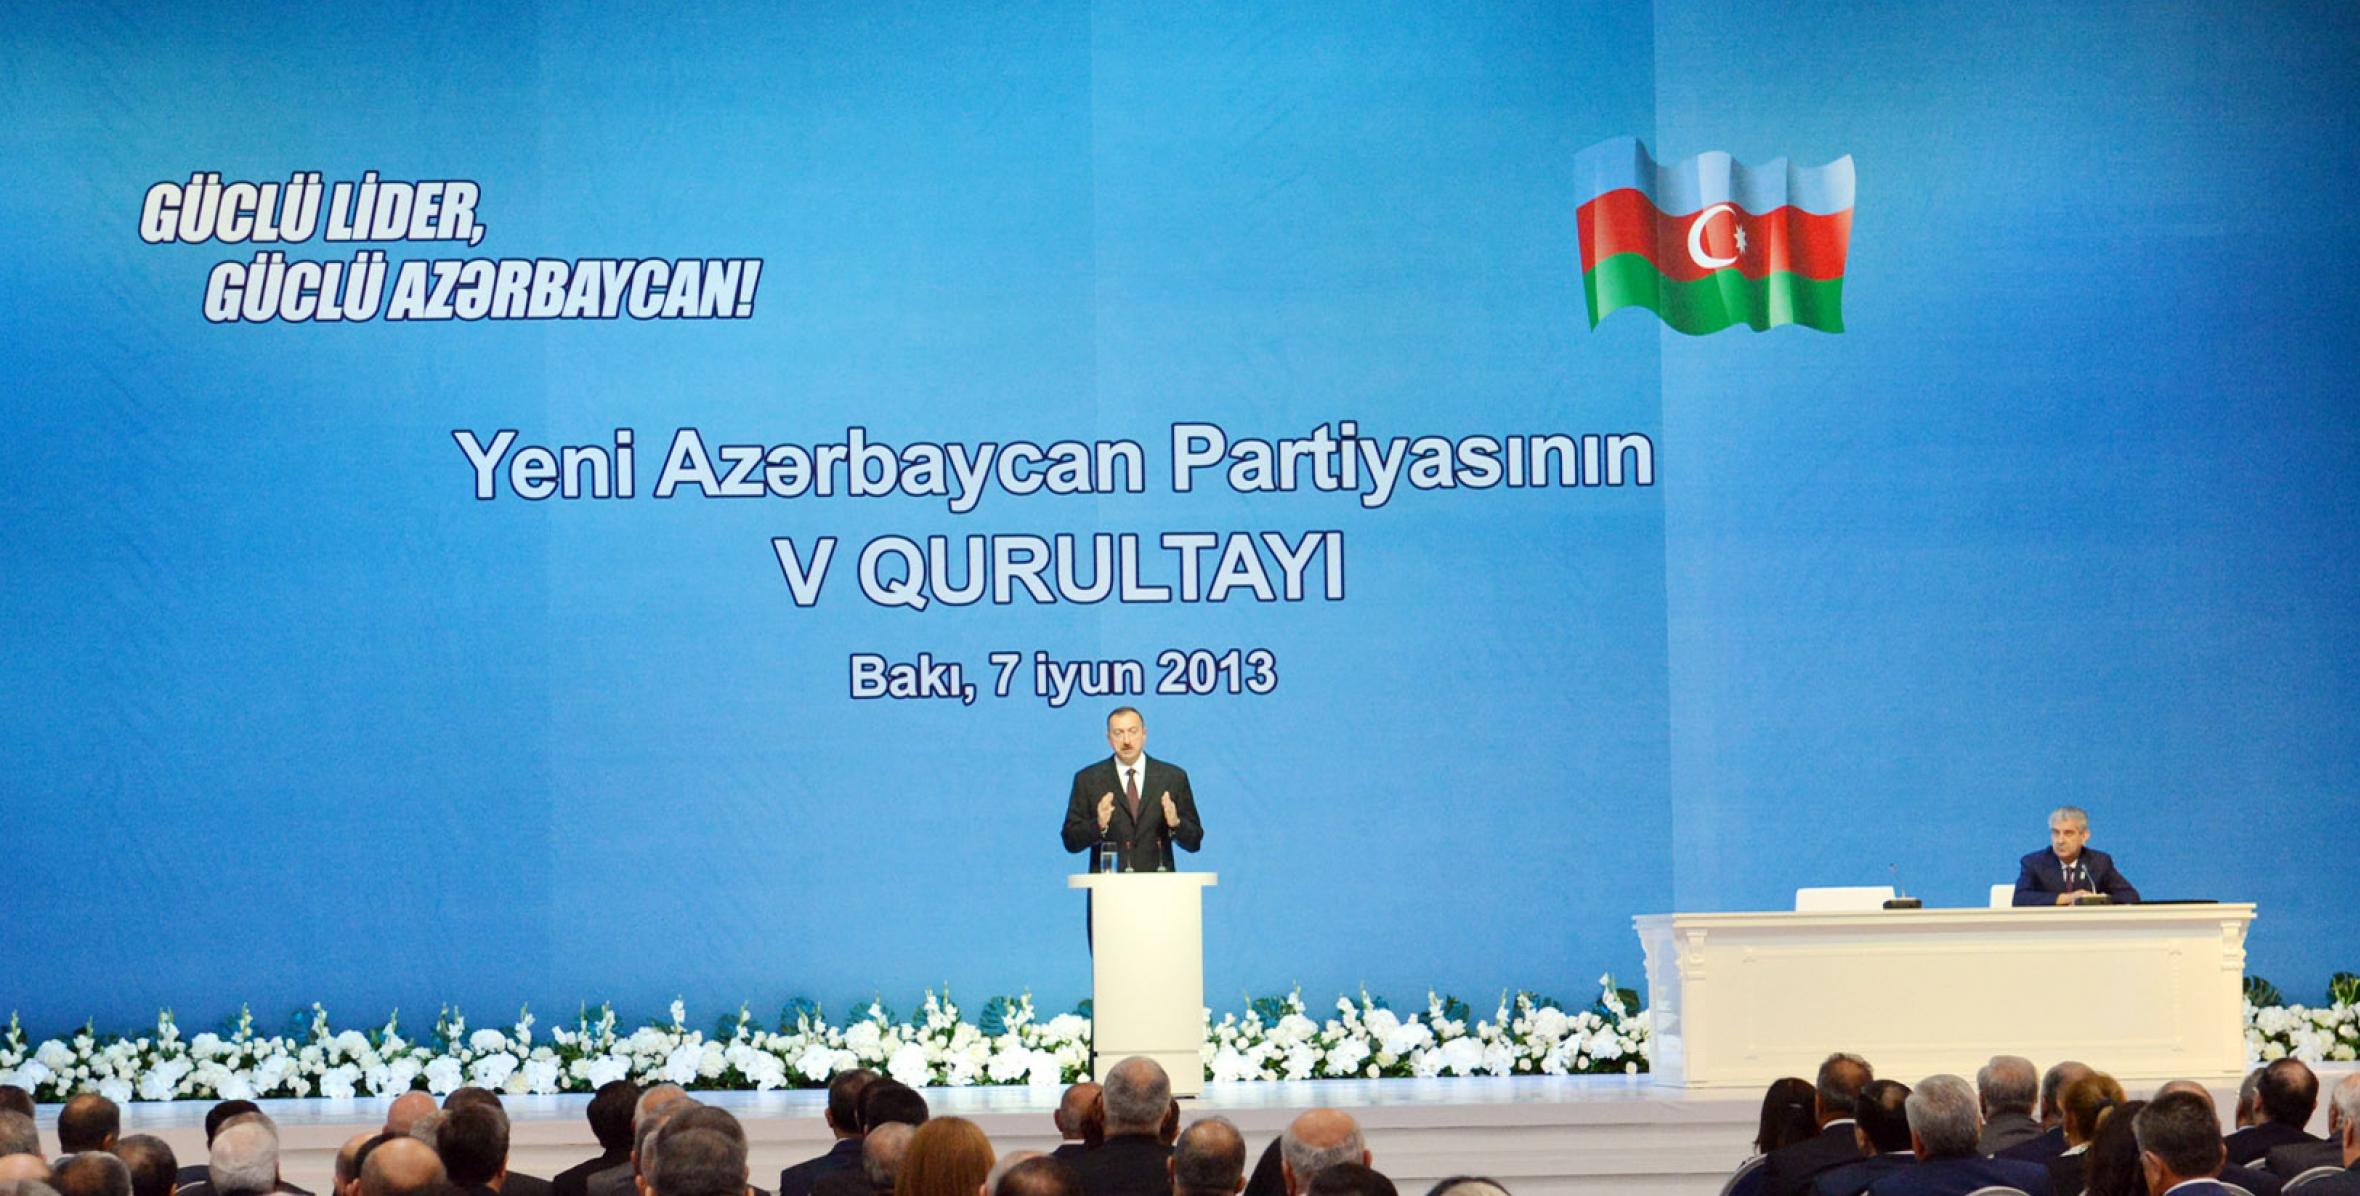 The Fifth Congress of the "Yeni Azerbaijan Party" nominated Chairman of the Party and President of the Republic of Azerbaijan Ilham Aliyev to stand in the presidential election in October 2013